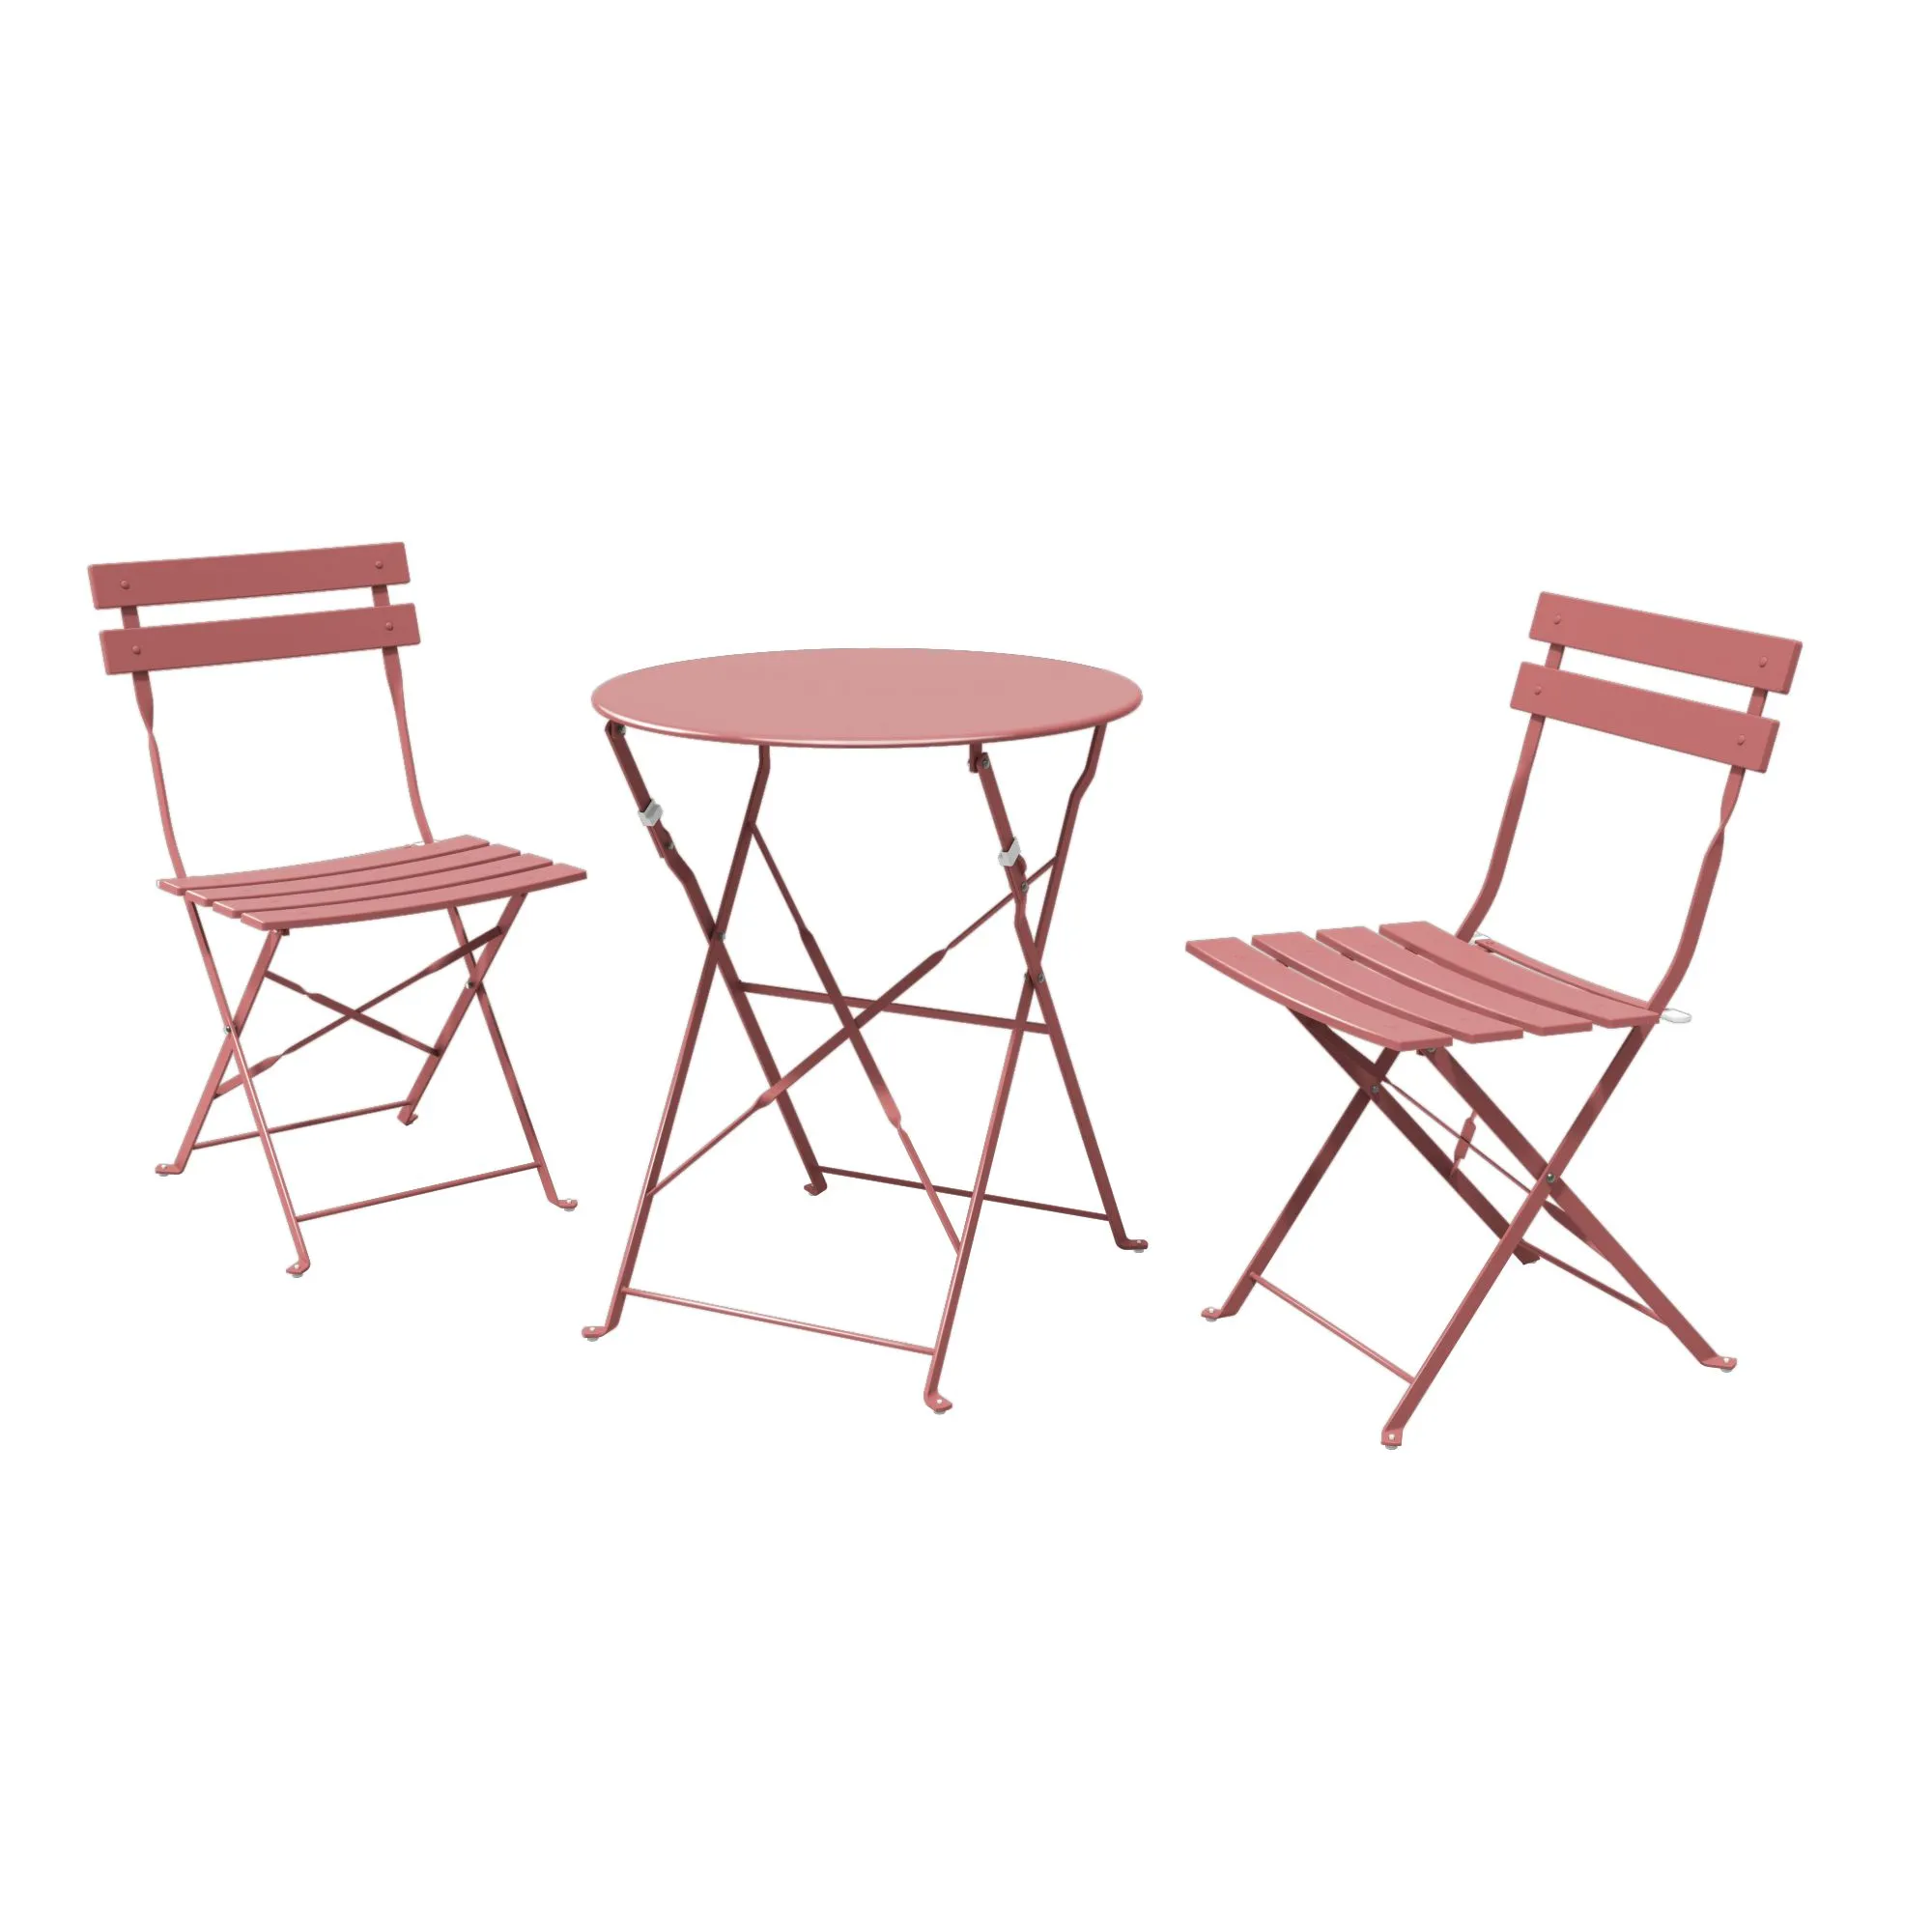 SR Steel Patio Bistro Set, Folding Outdoor Patio Furniture Sets, 3 Piece Patio Set of Foldable Patio Table and Chairs,lotus pink